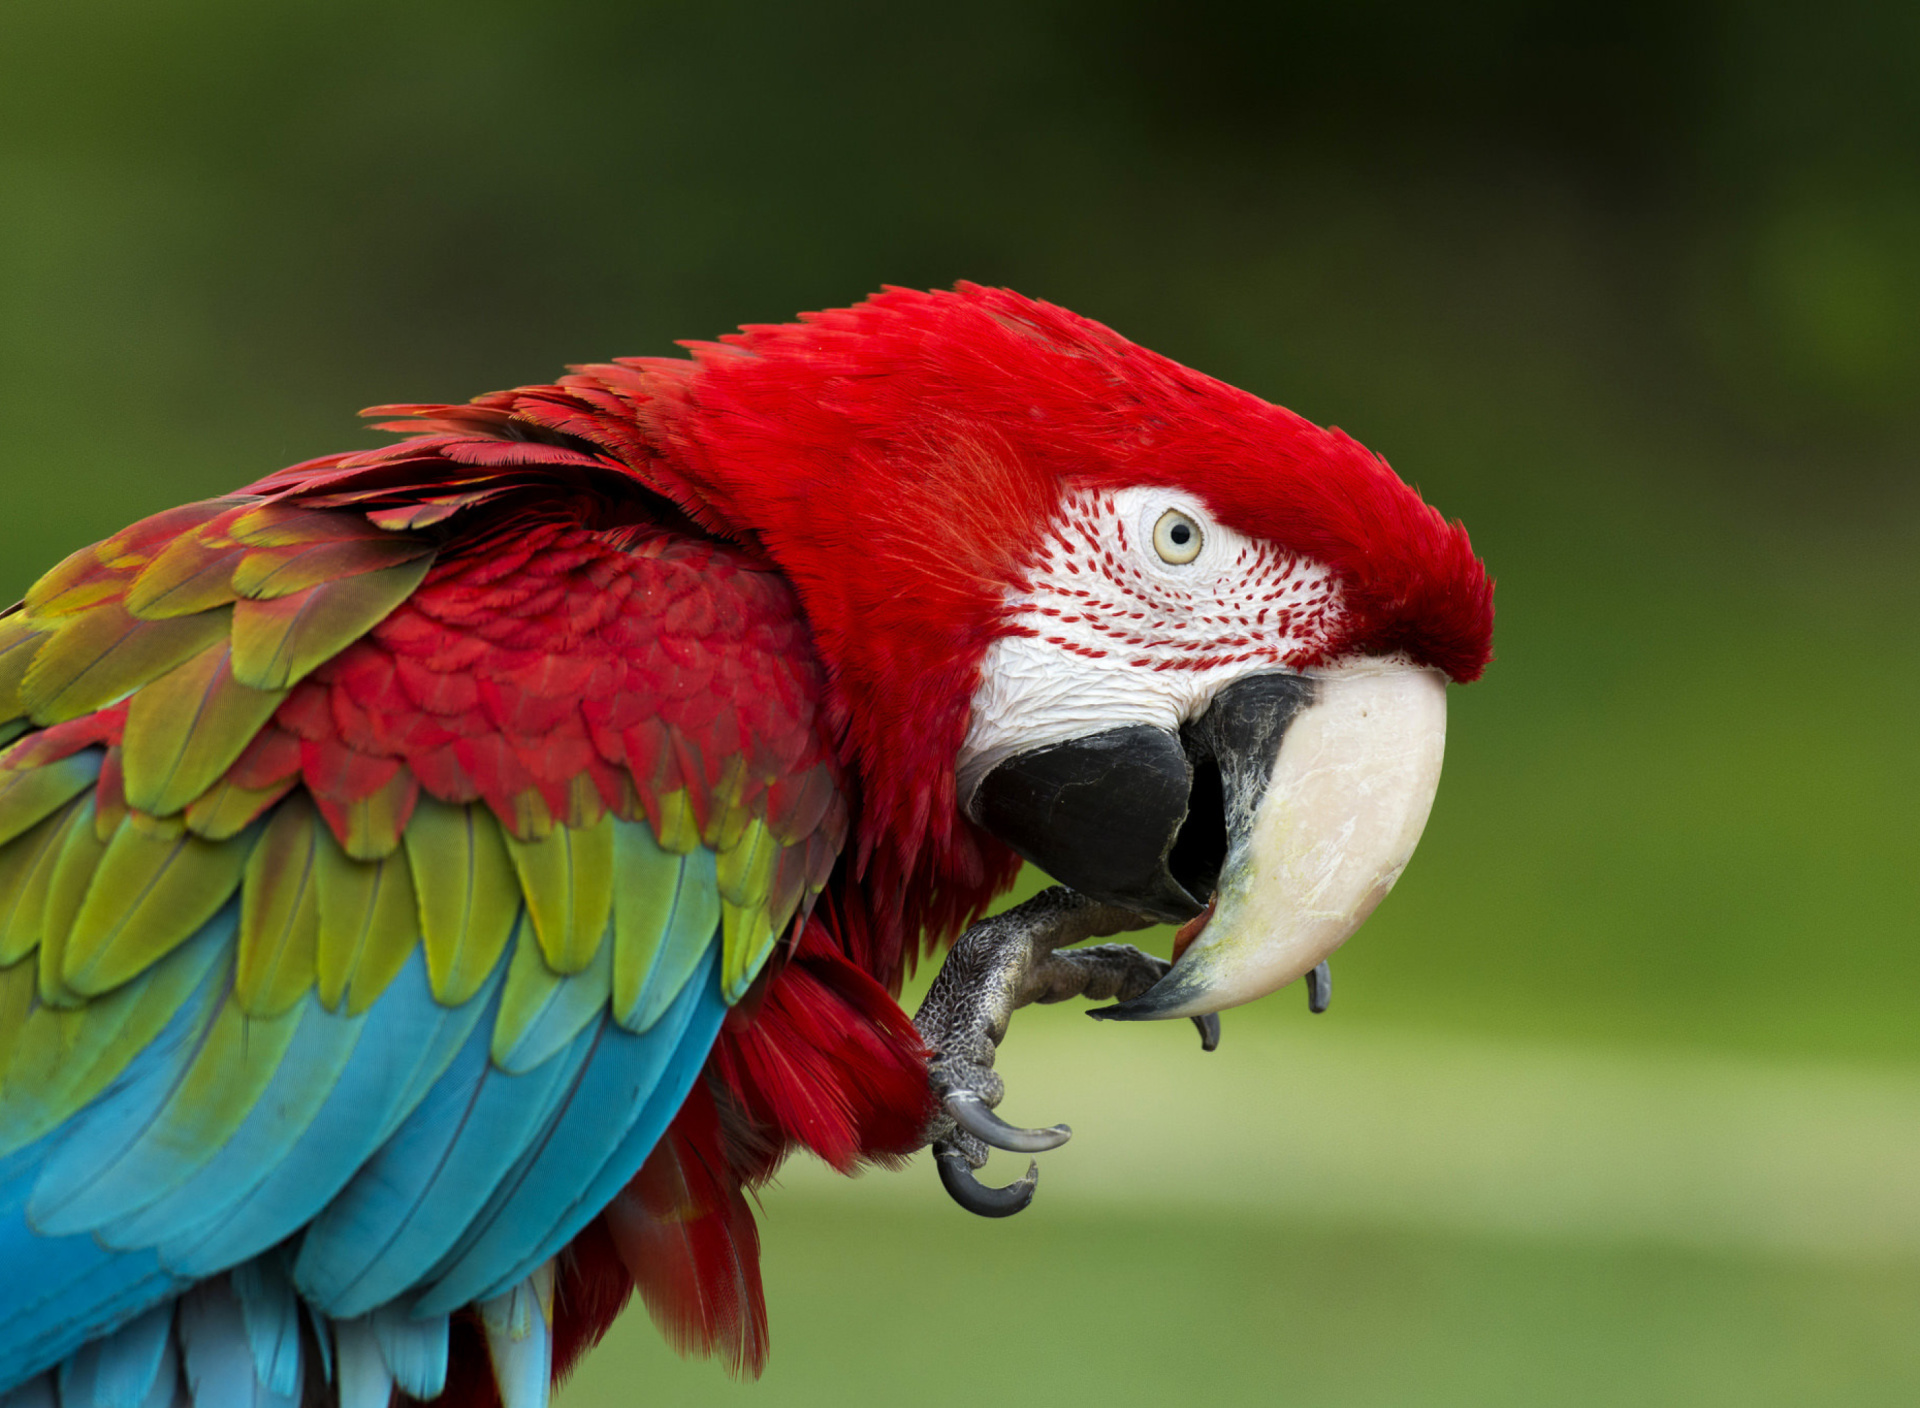 Green winged macaw wallpaper 1920x1408